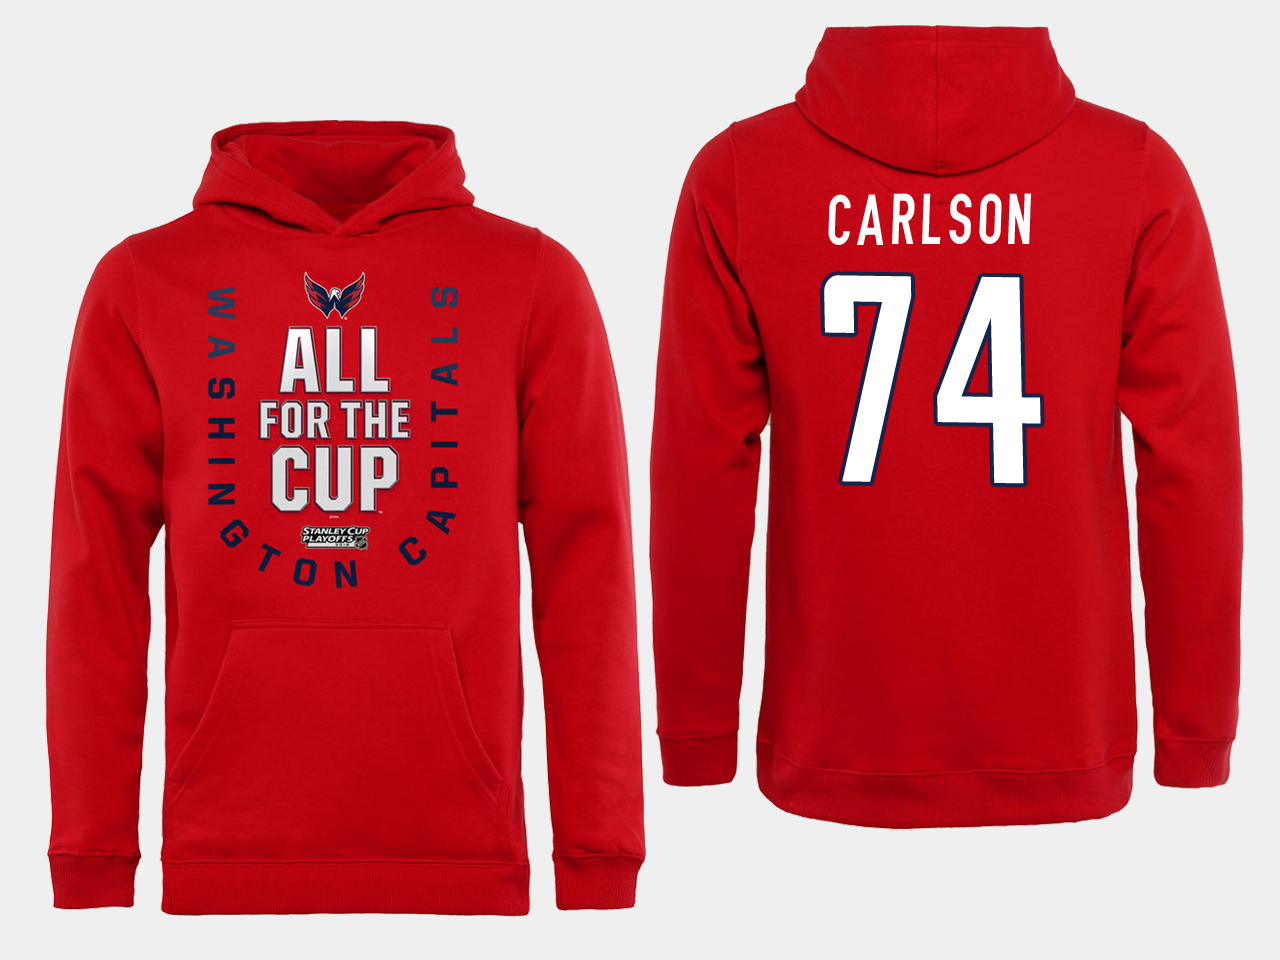 Men NHL Washington Capitals #74 Carlson Red All for the Cup Hoodie